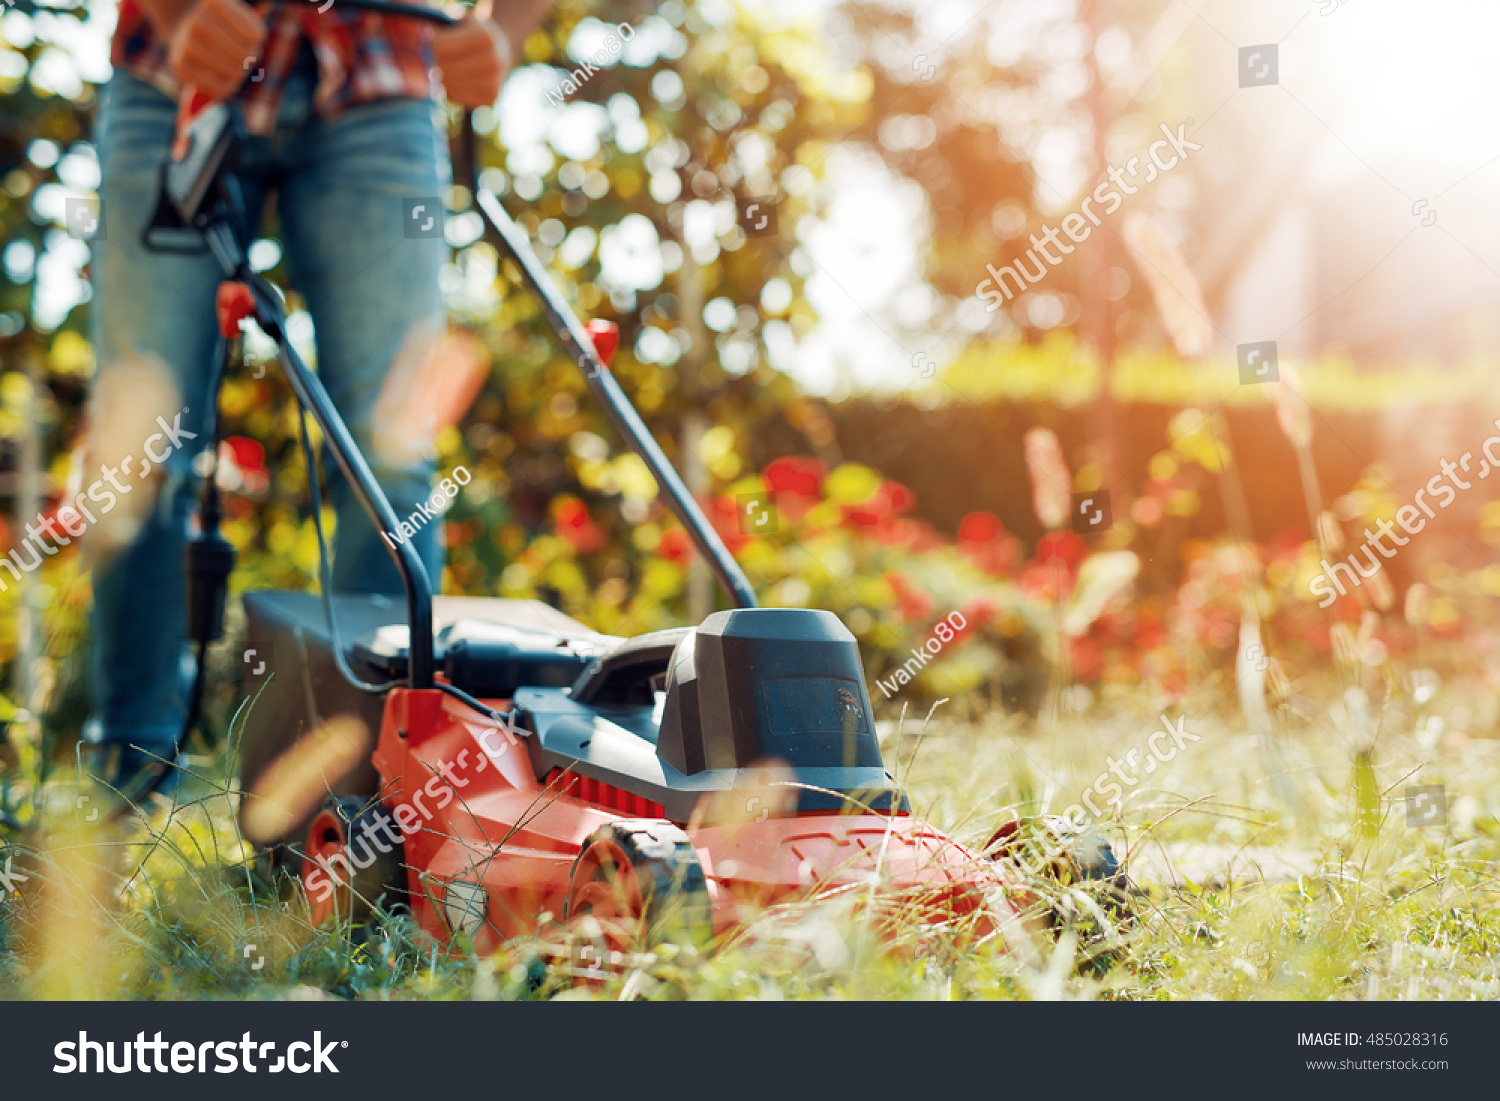 Close up of mower cutting the grass. #485028316